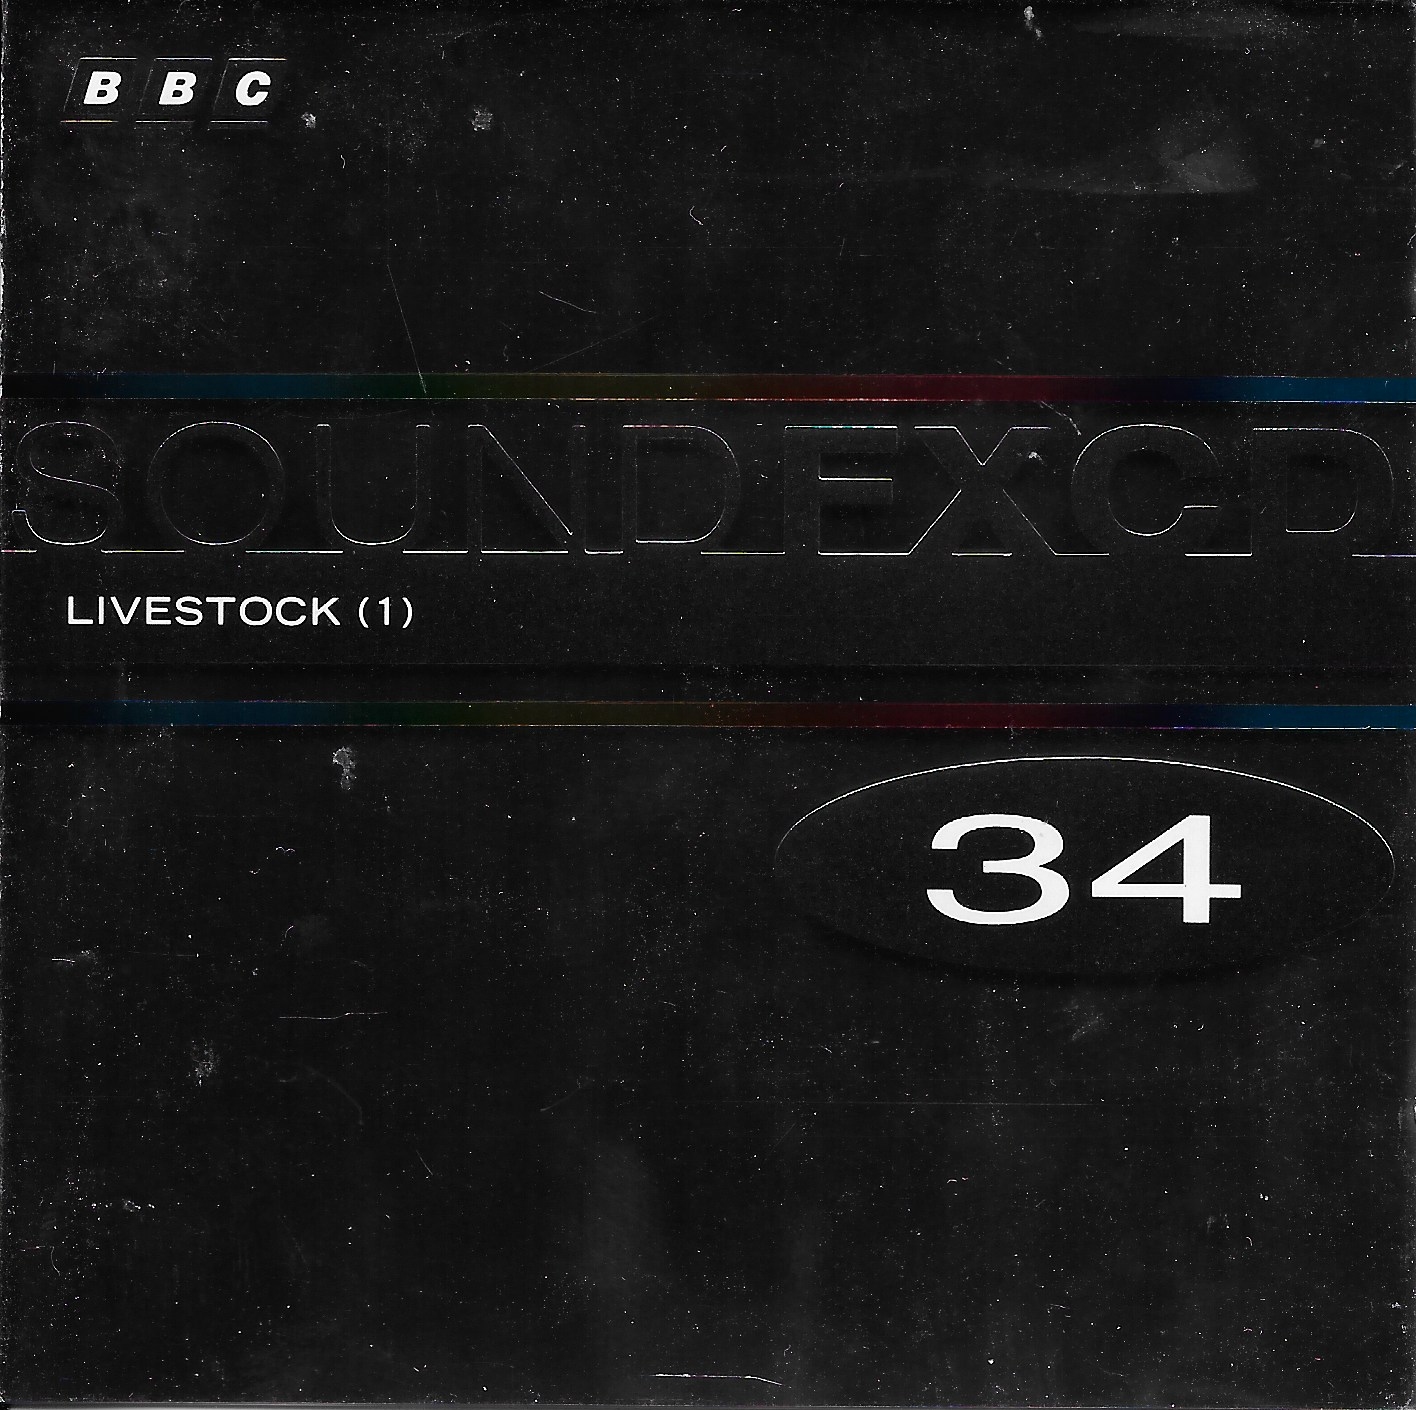 Picture of BBCCD SFX034 Livestock (1) by artist Various